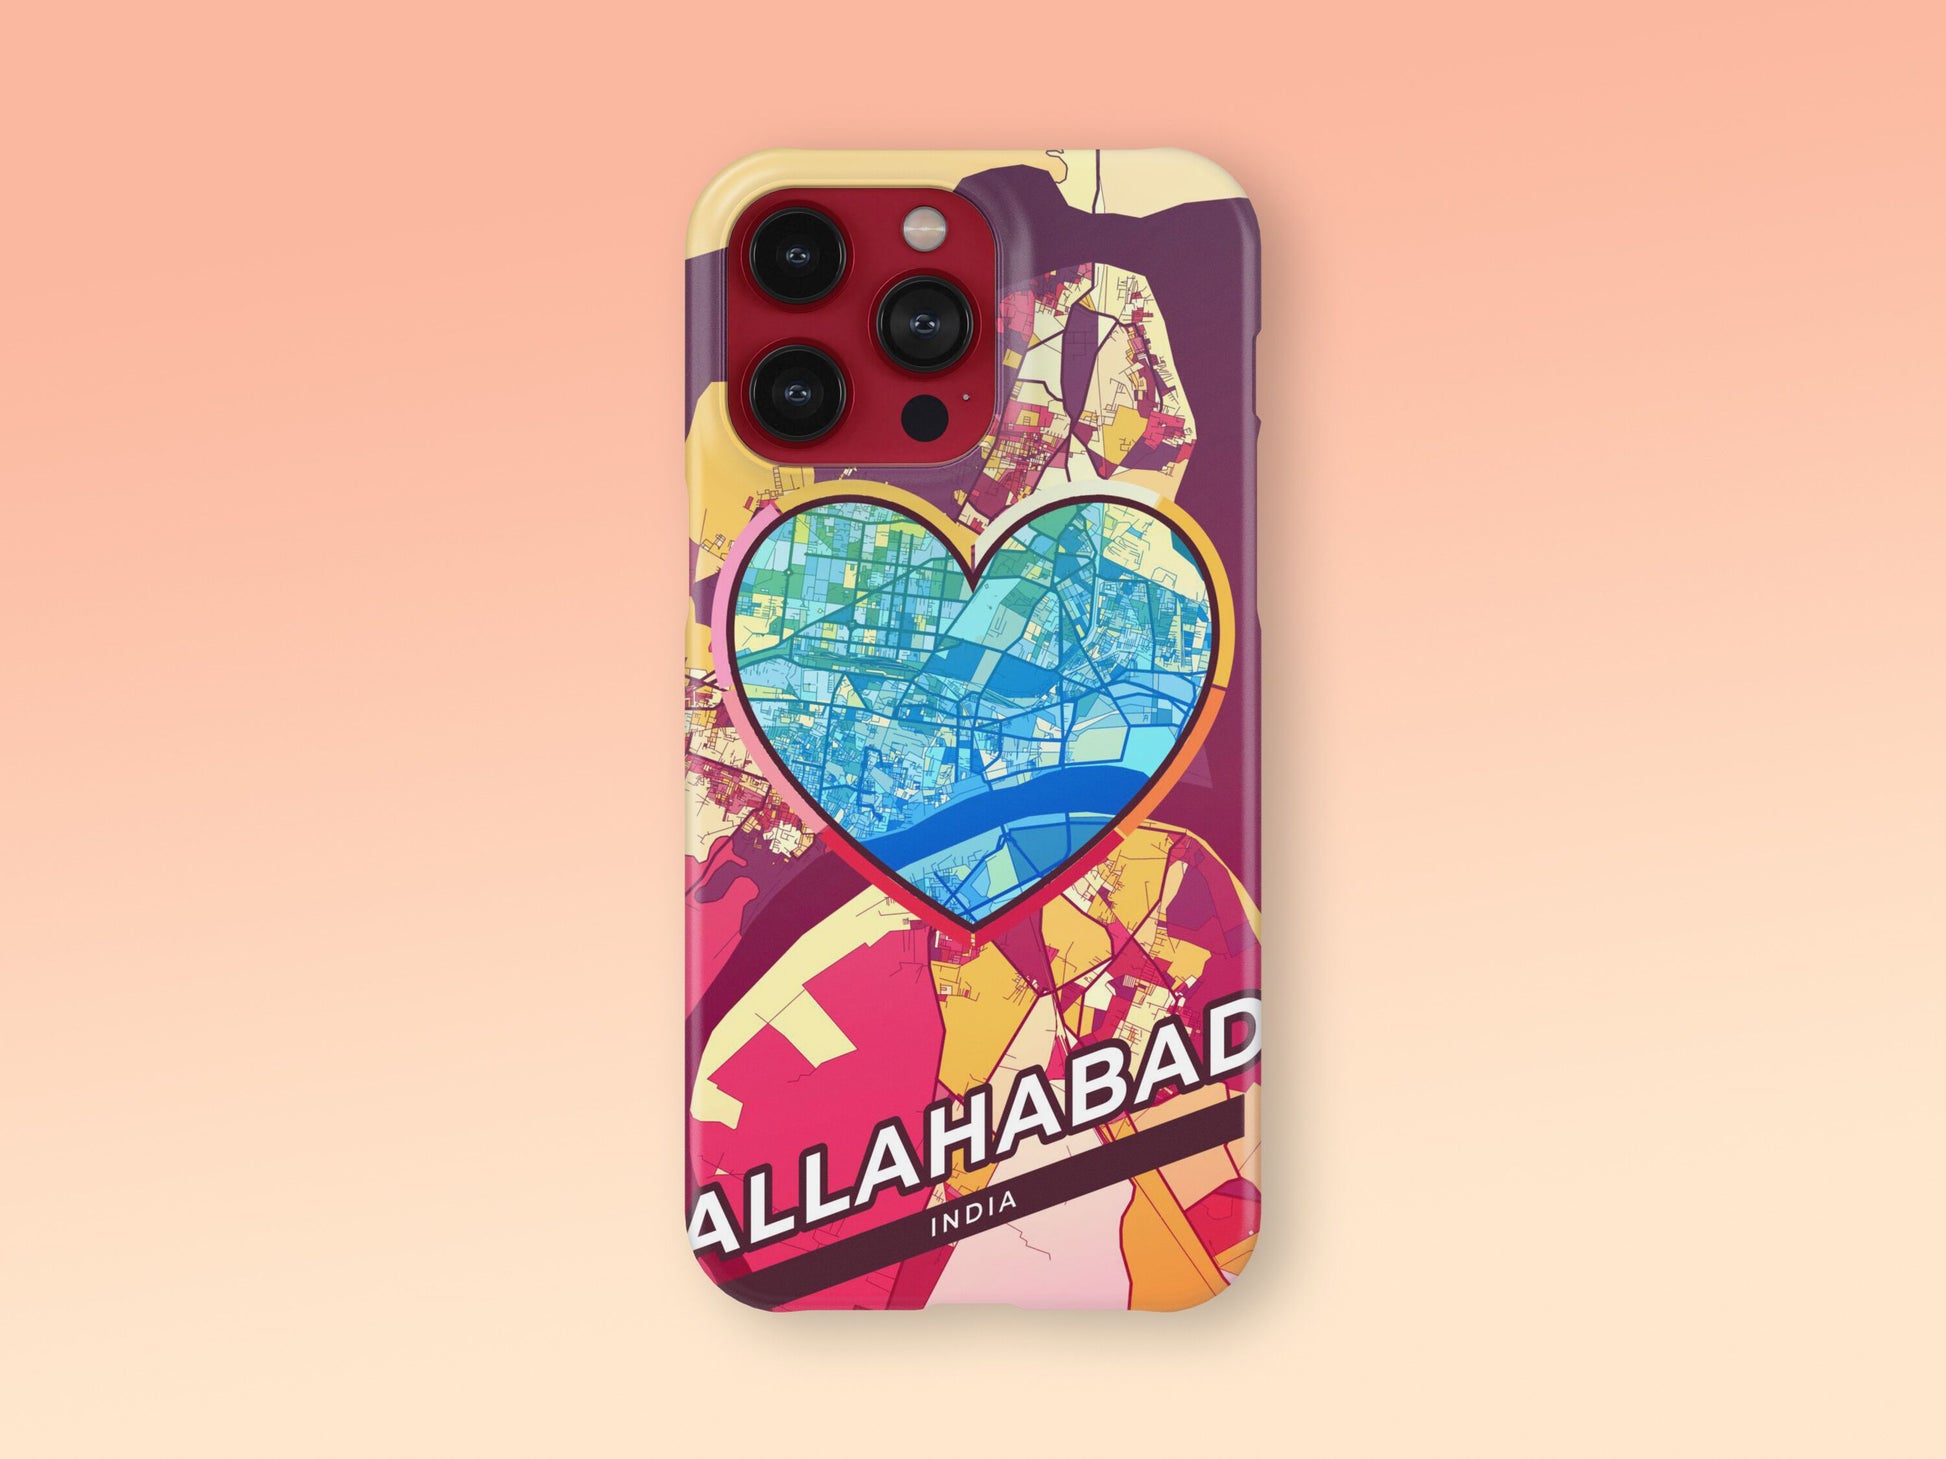 Allahabad India slim phone case with colorful icon. Birthday, wedding or housewarming gift. Couple match cases. 2